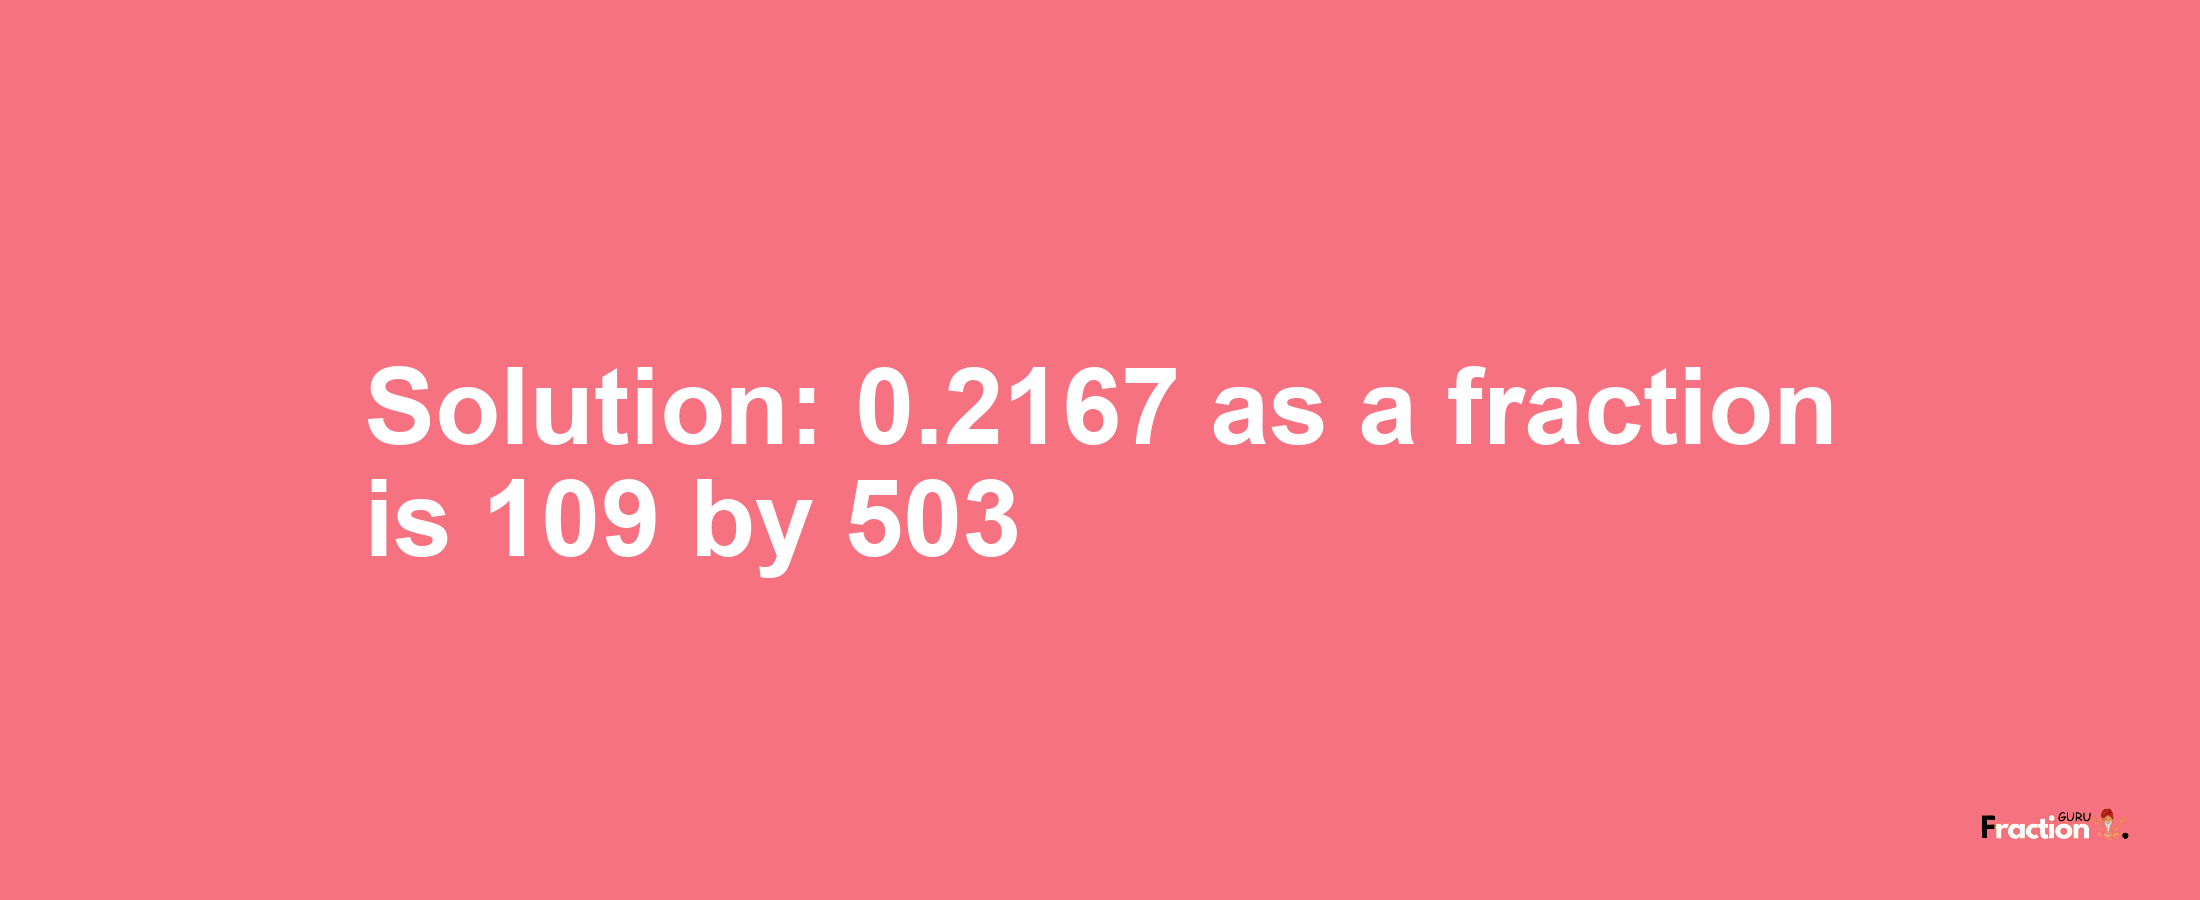 Solution:0.2167 as a fraction is 109/503